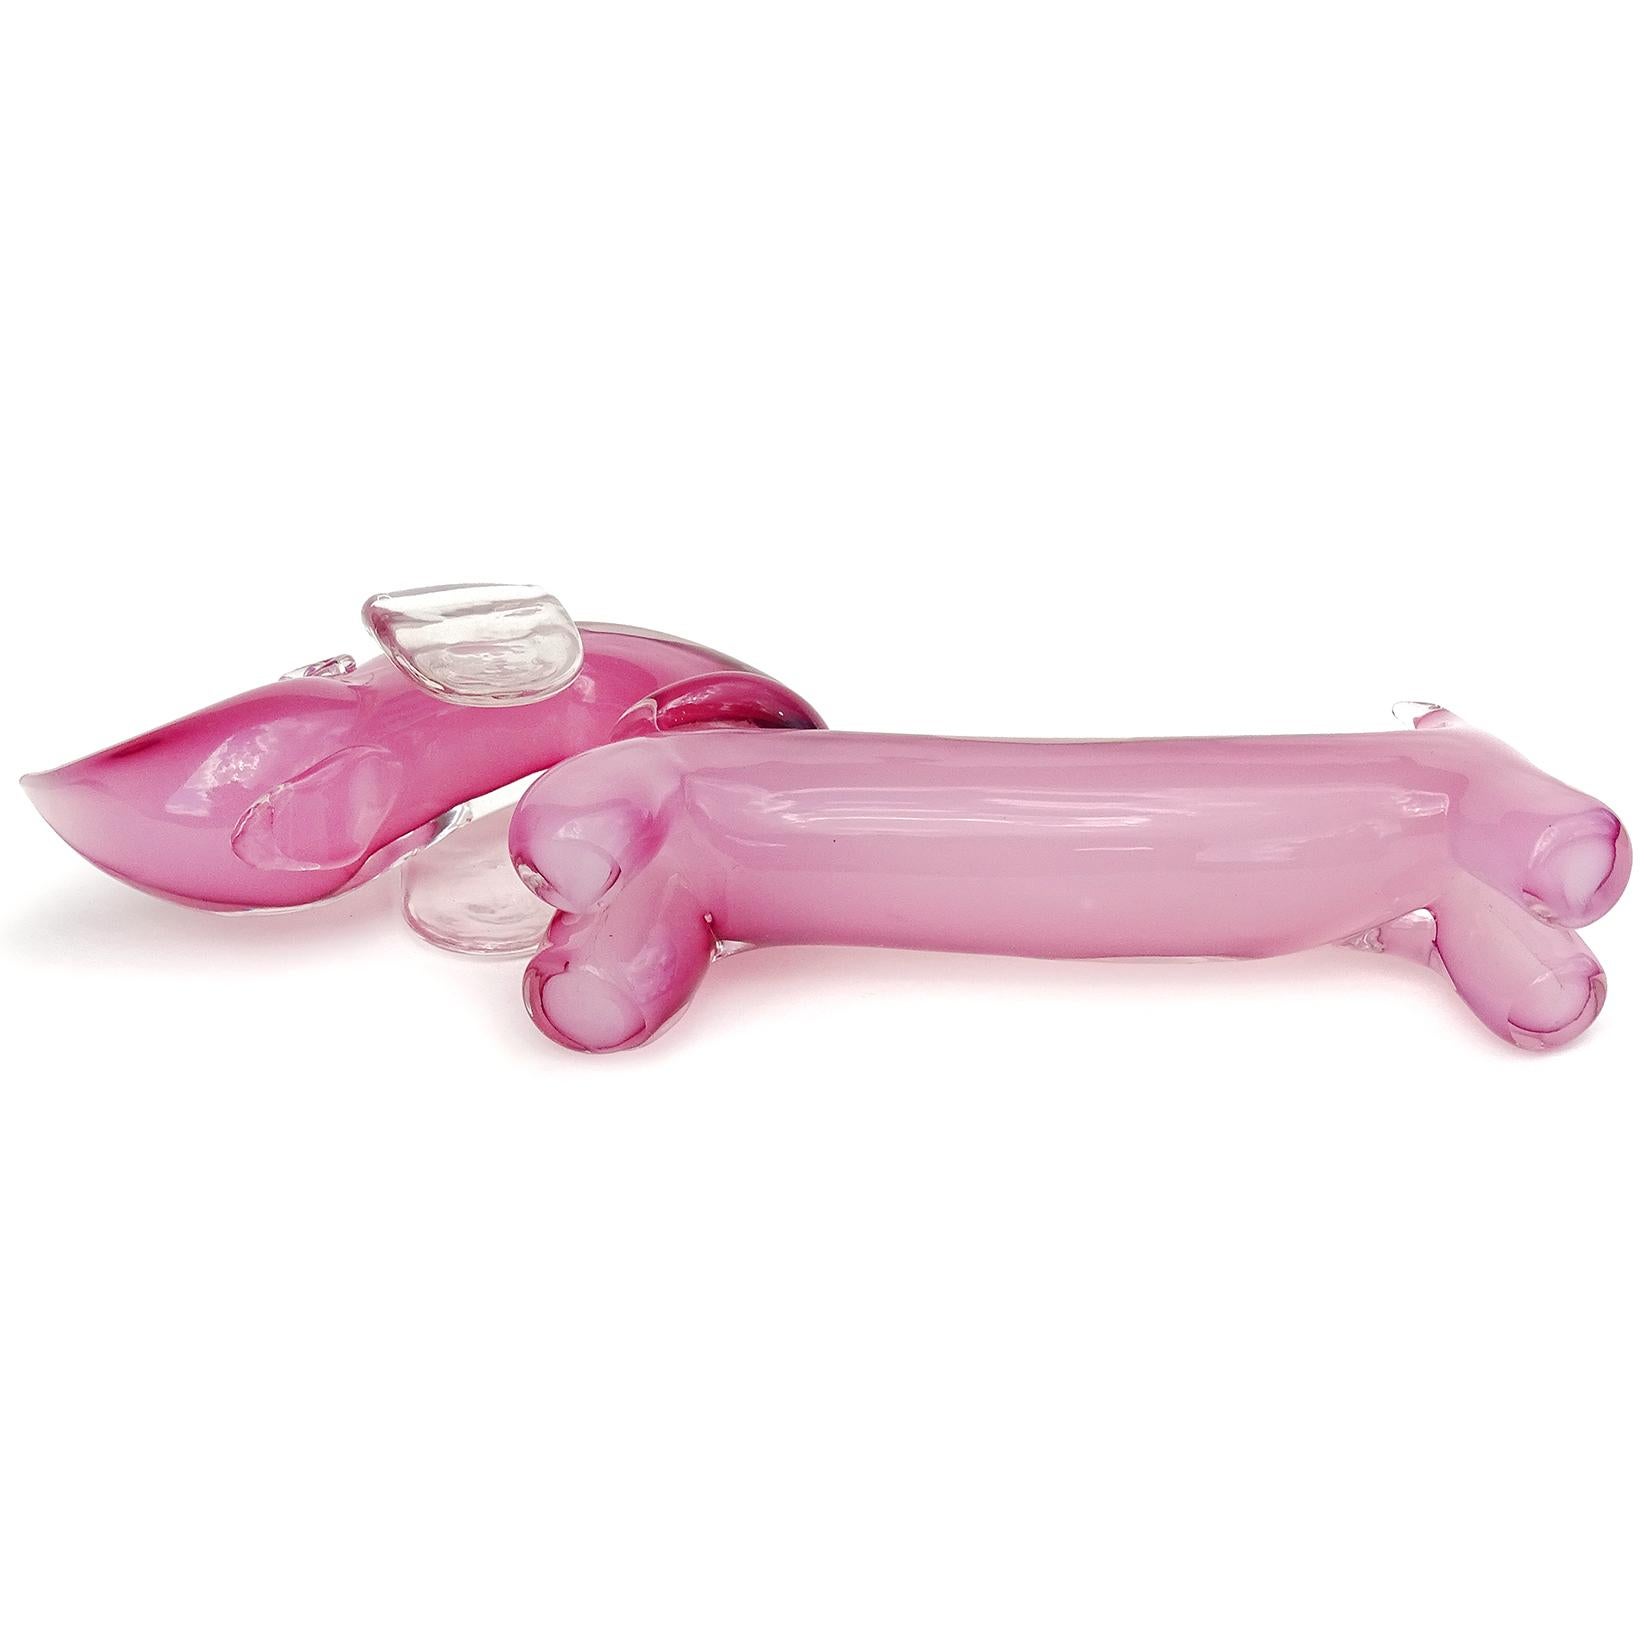 Hand-Crafted Seguso Murano Sommerso Opal Pink Italian Art Glass Dachshund Puppy Dog Sculpture